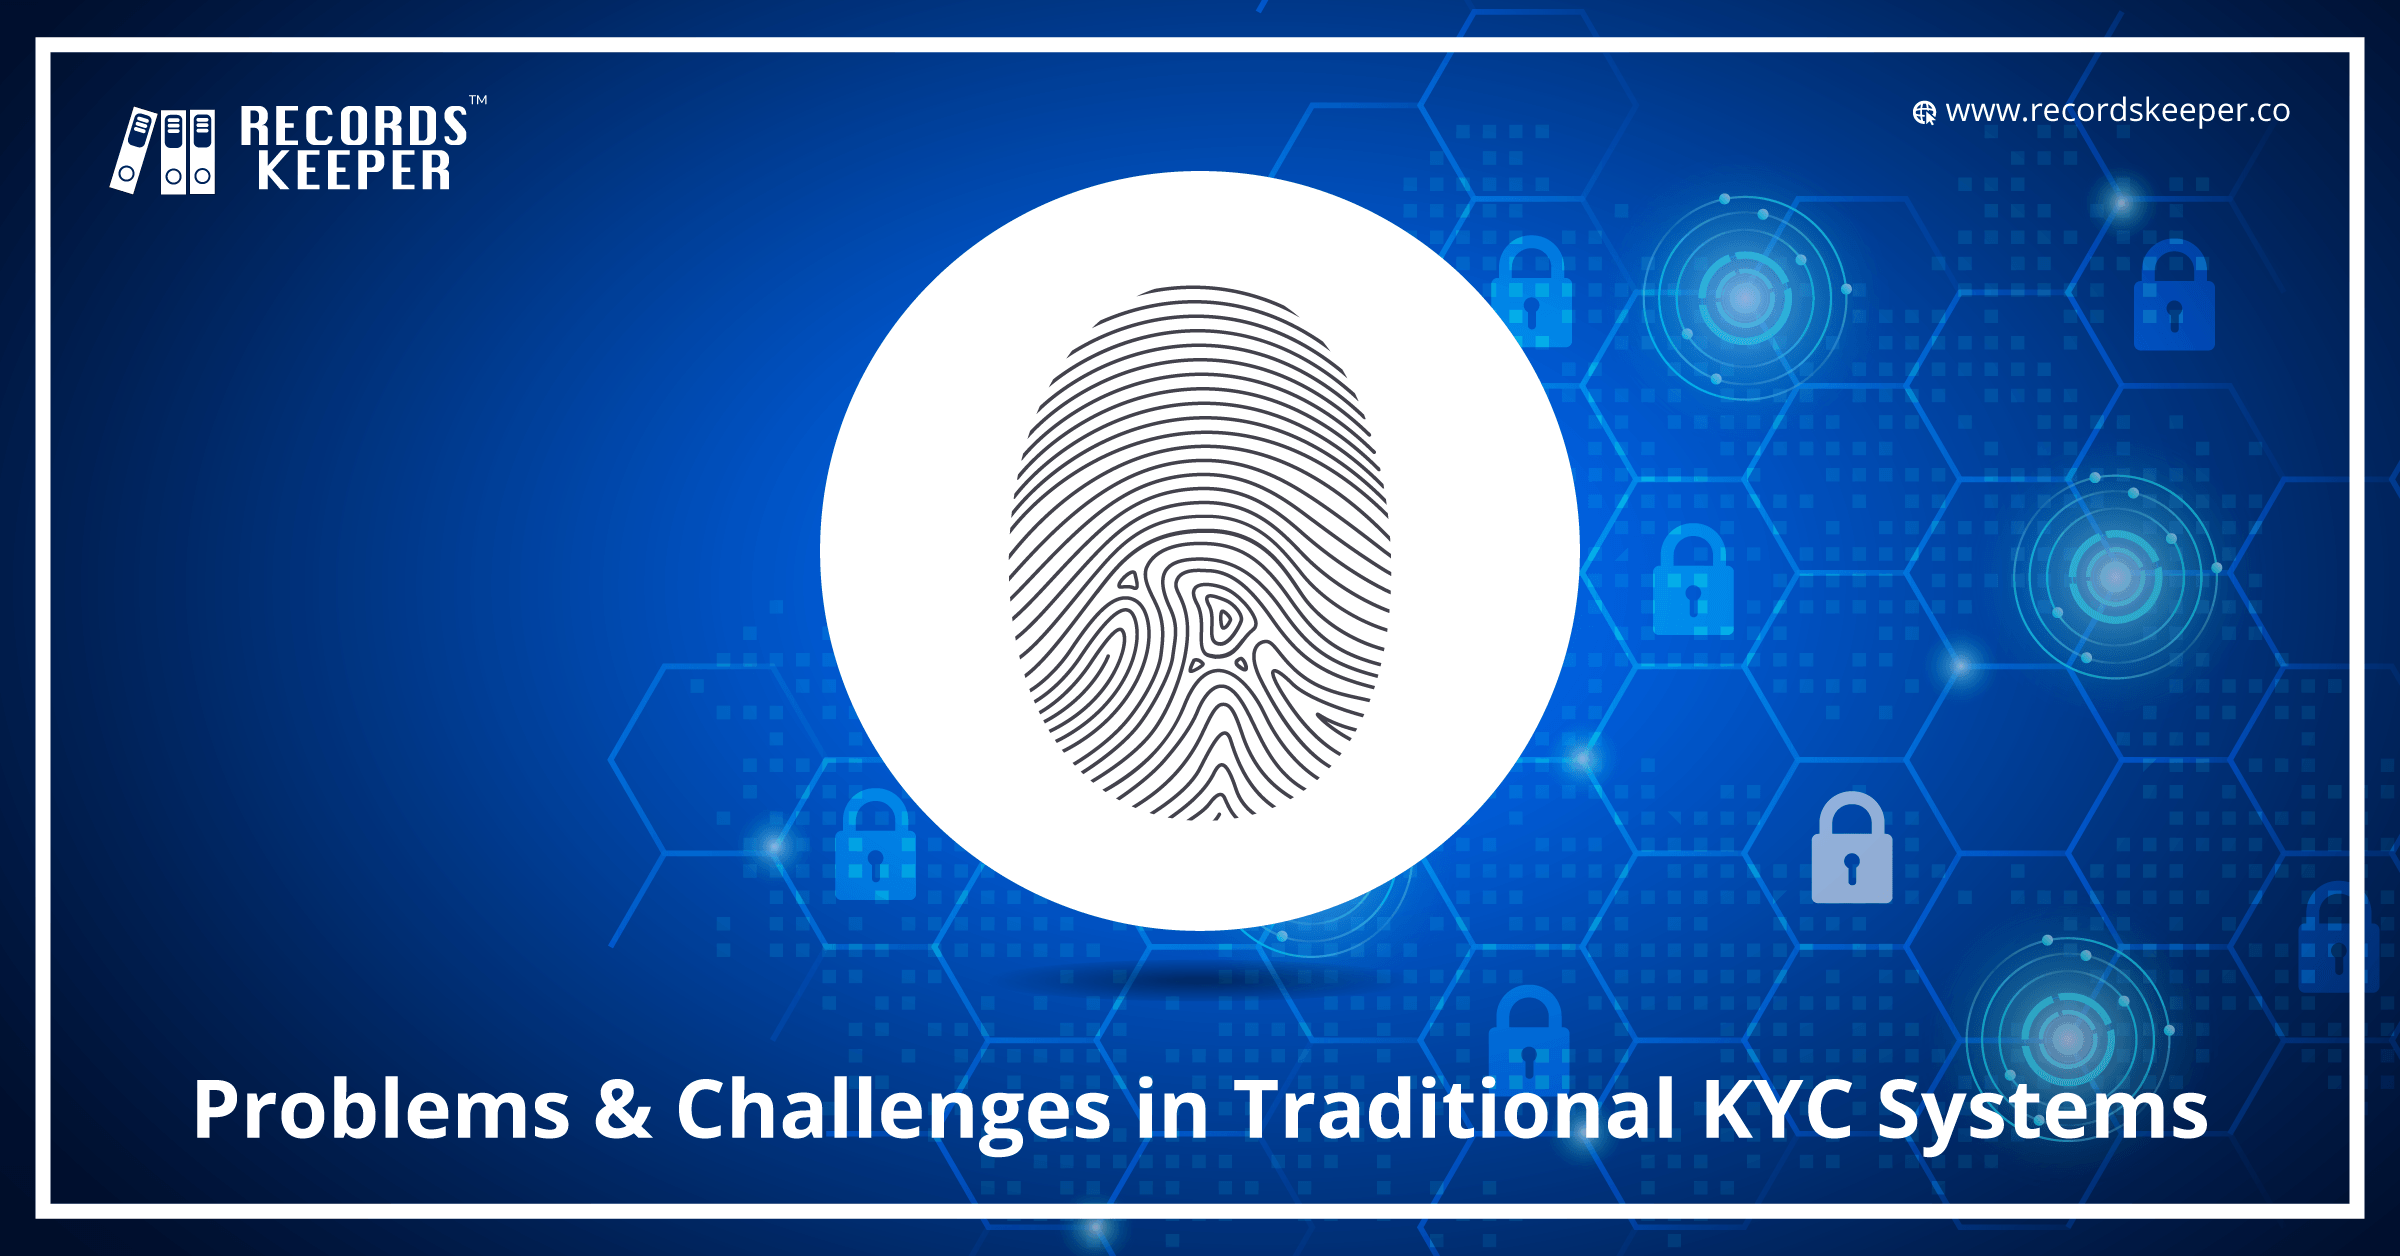 Problems & Challenges in Traditional KYC Systems